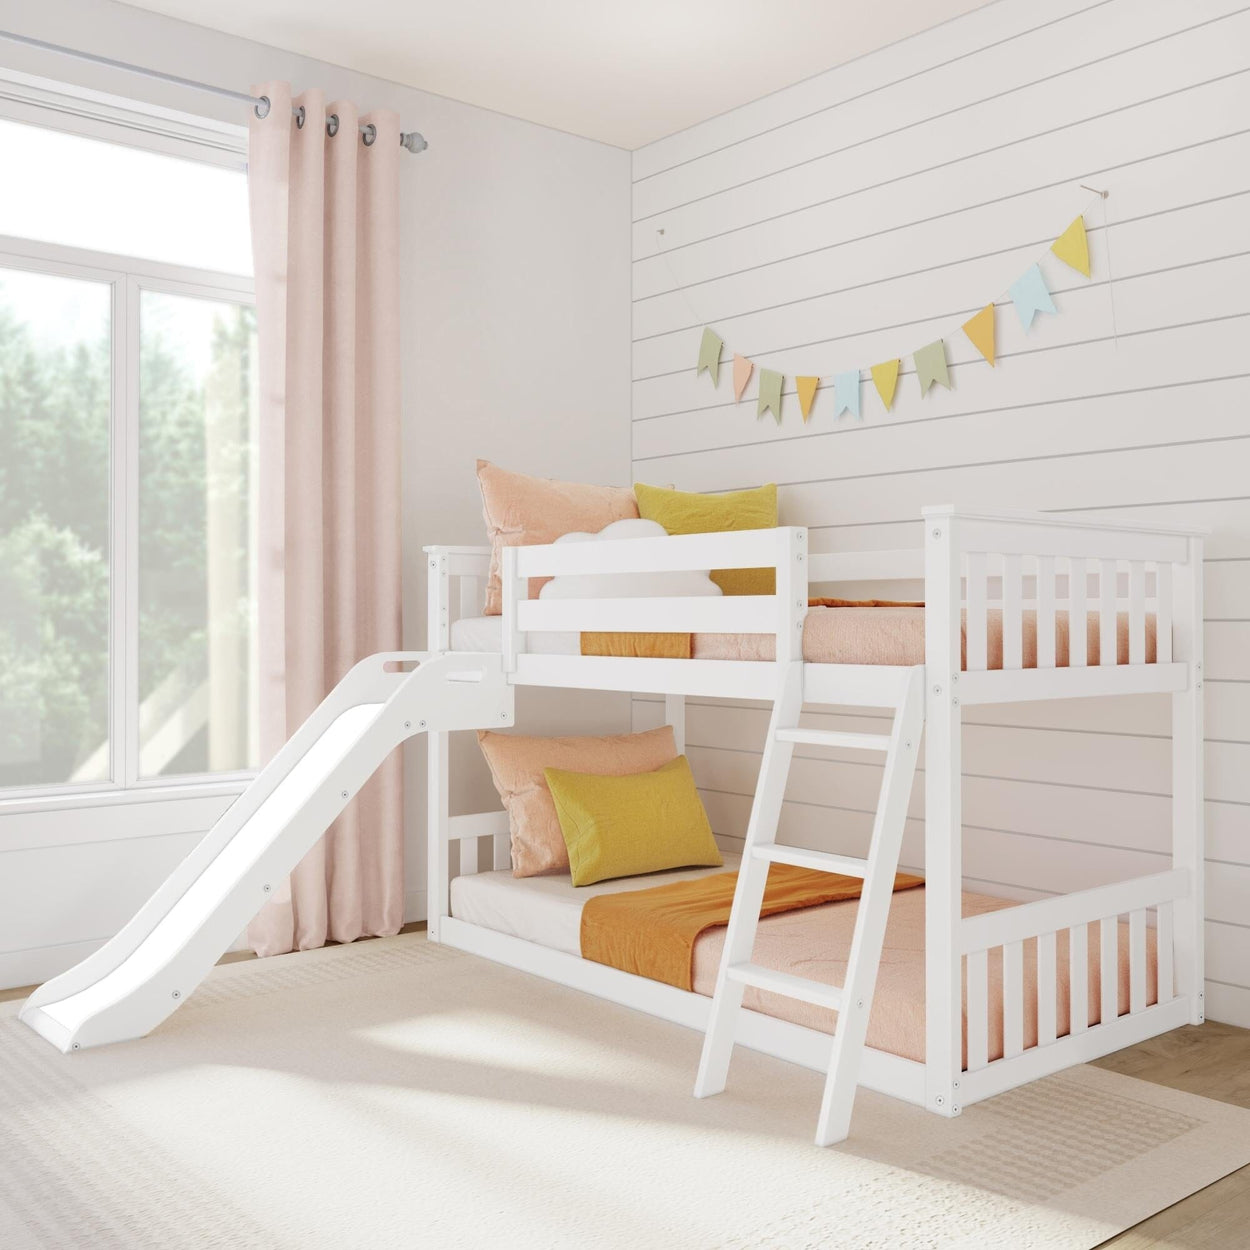 180417-002 : Bunk Beds Max & Lily Twin Over Twin Low Bunk with Slide and Ladder, Wooden Bunk beds with 14” Safety Guardrail for Kids, Toddlers, Boys, Girls, Teens, Bedroom Furniture, White